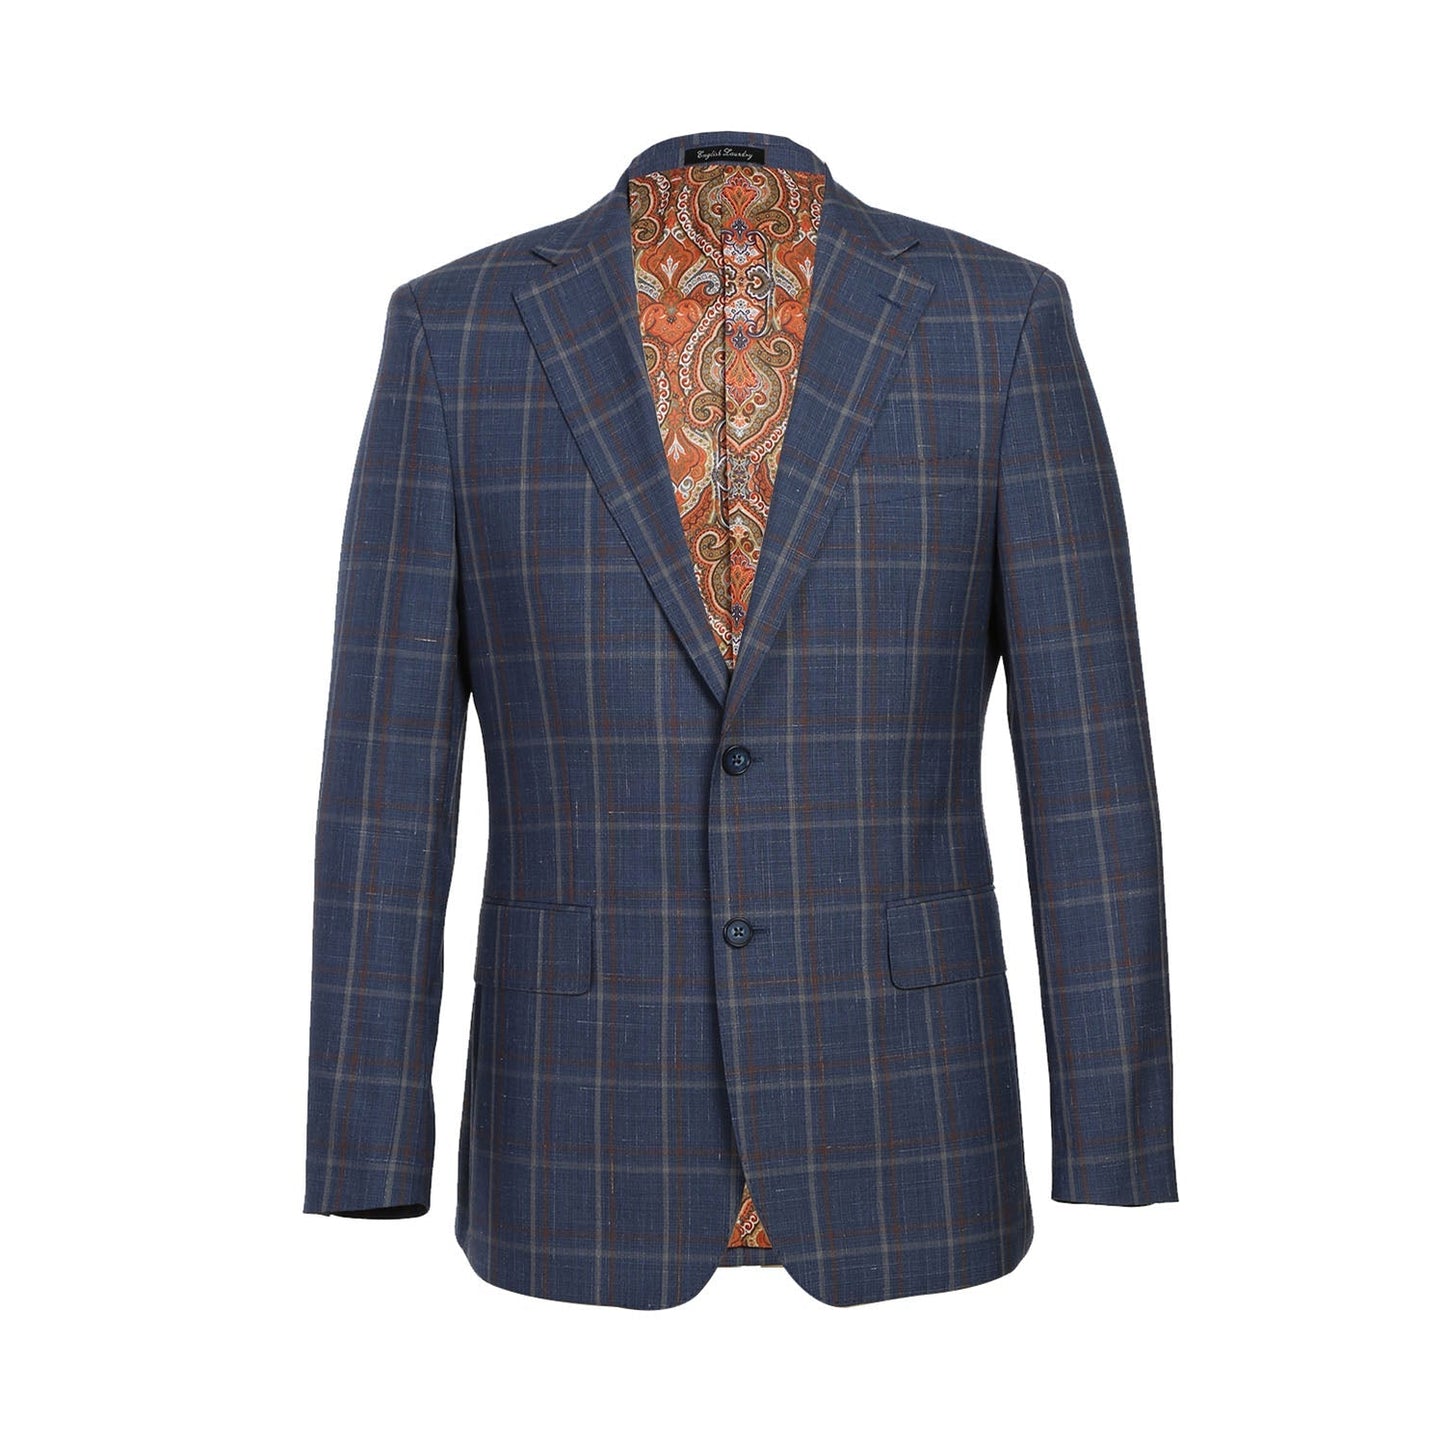 EL72-62-400 Slim Fit English Laundry Light Steel Blue with Orange Check Wool Suit